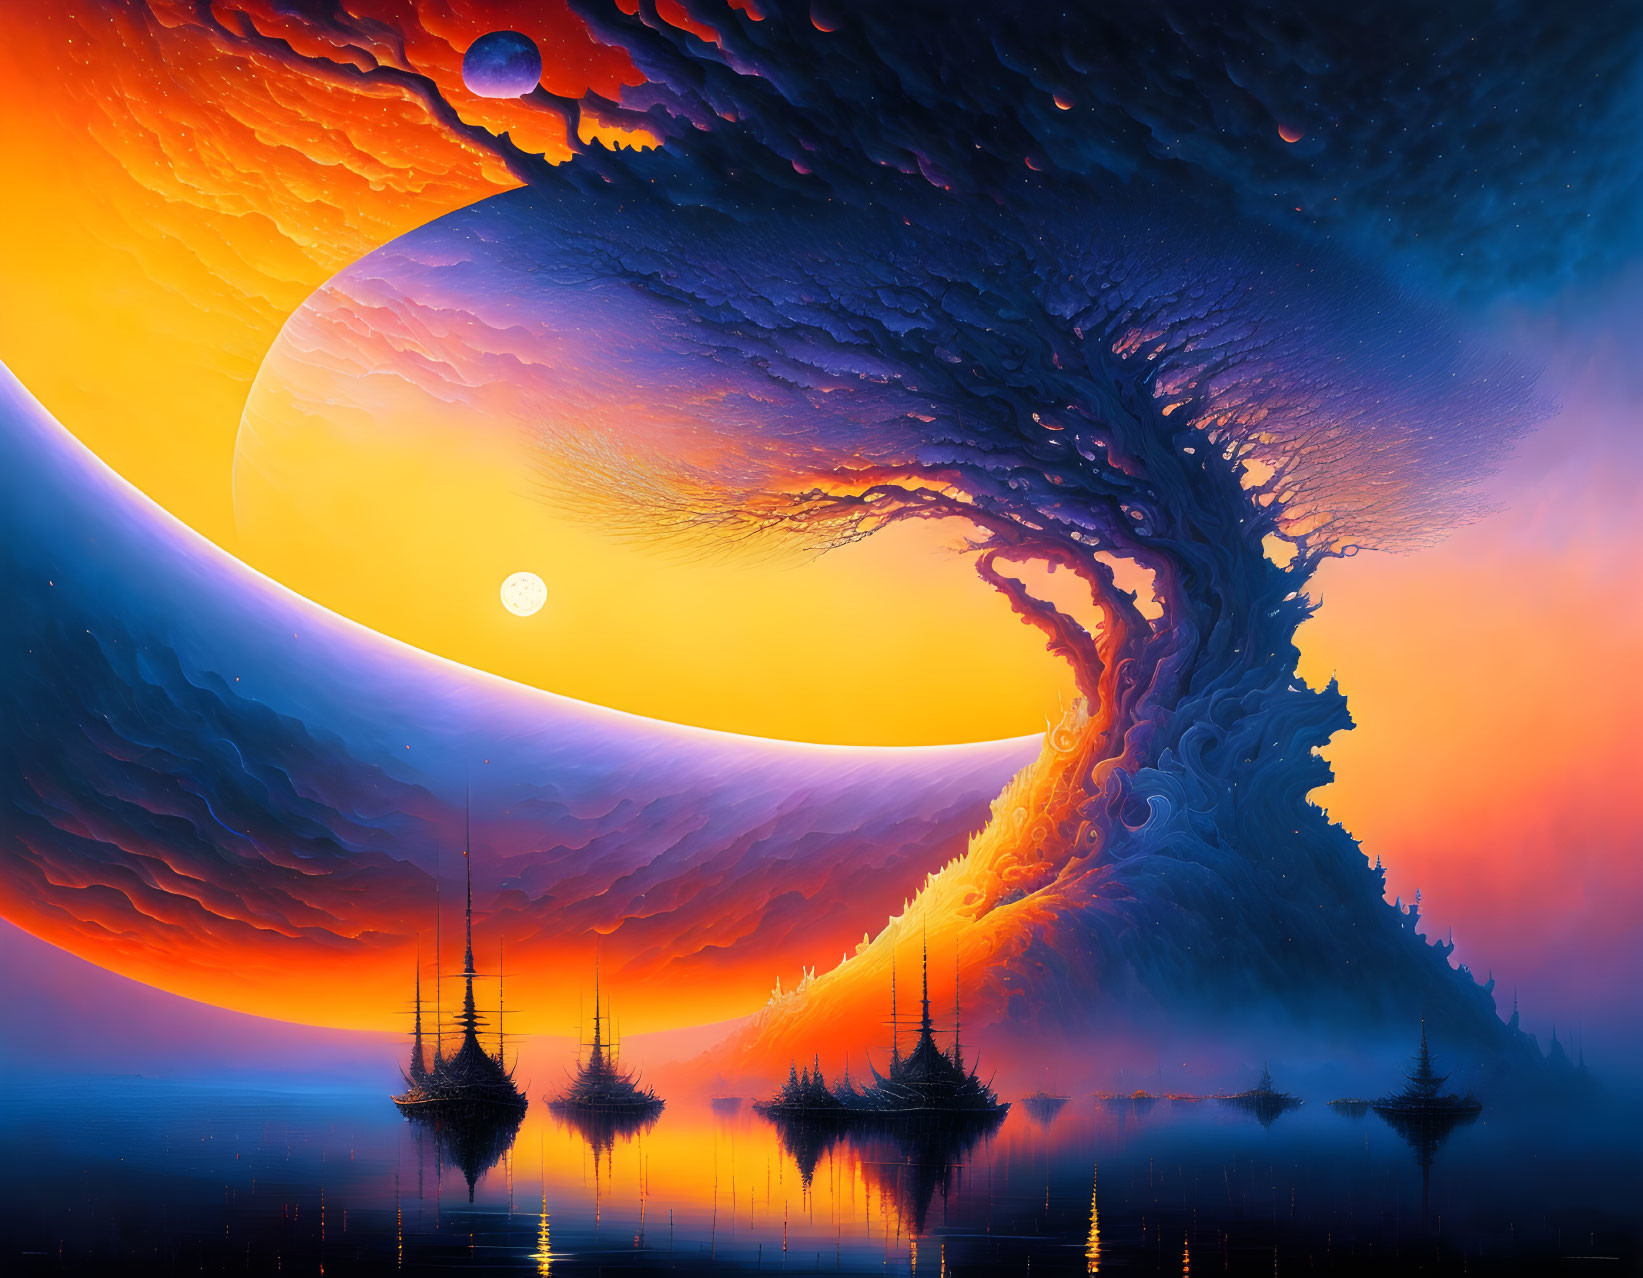 Fantasy landscape with large tree, crescent planet, moons, fiery skies, and sailing ships